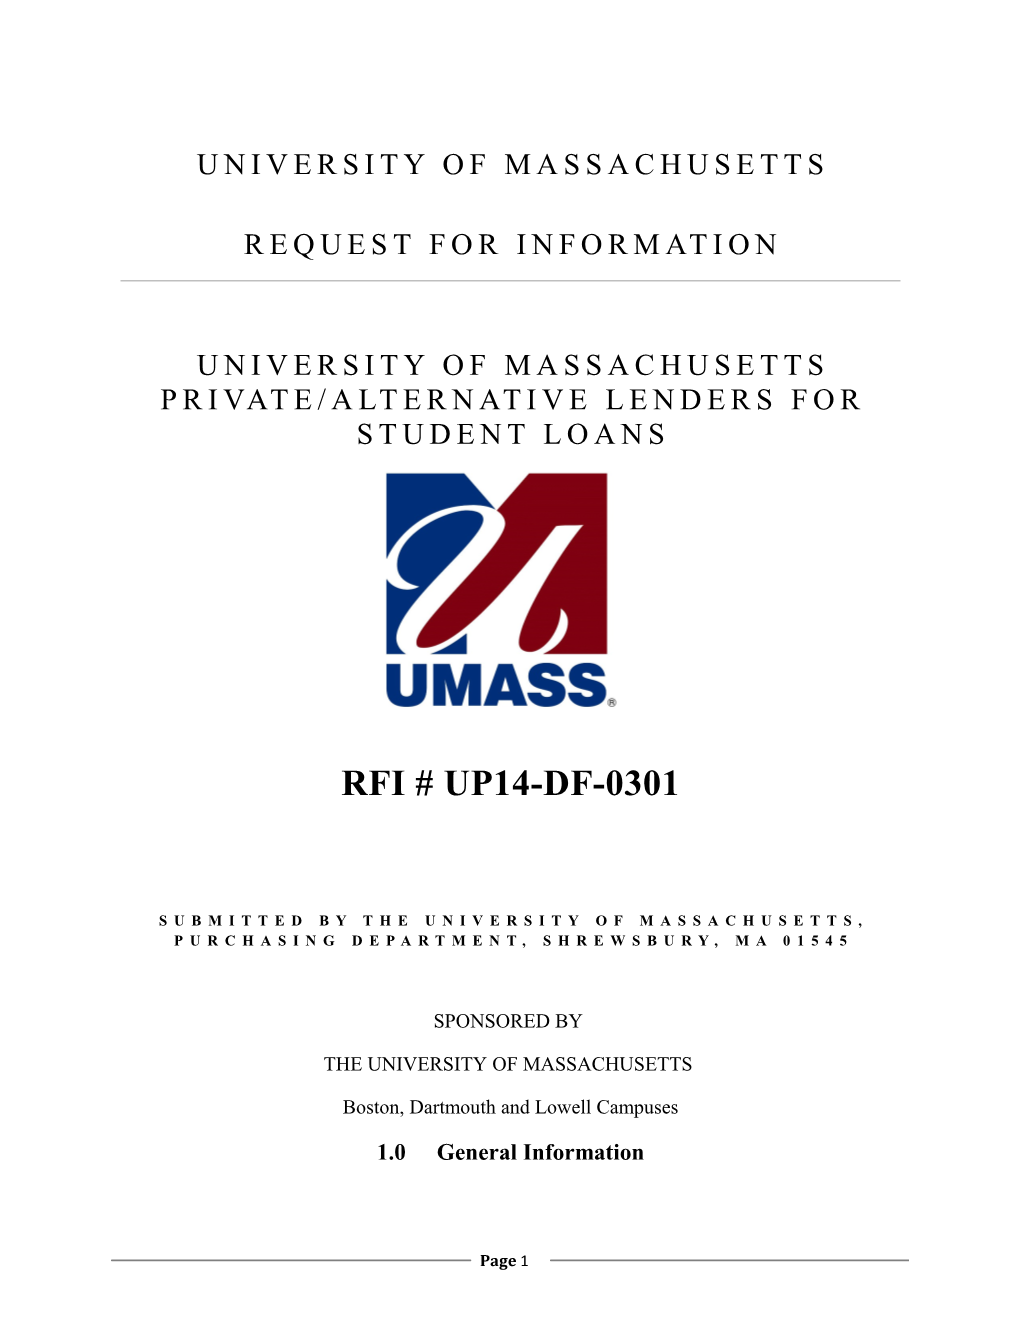 Submitted by the University of Massachusetts, Purchasing Department, Shrewsbury, Ma 01545 s1